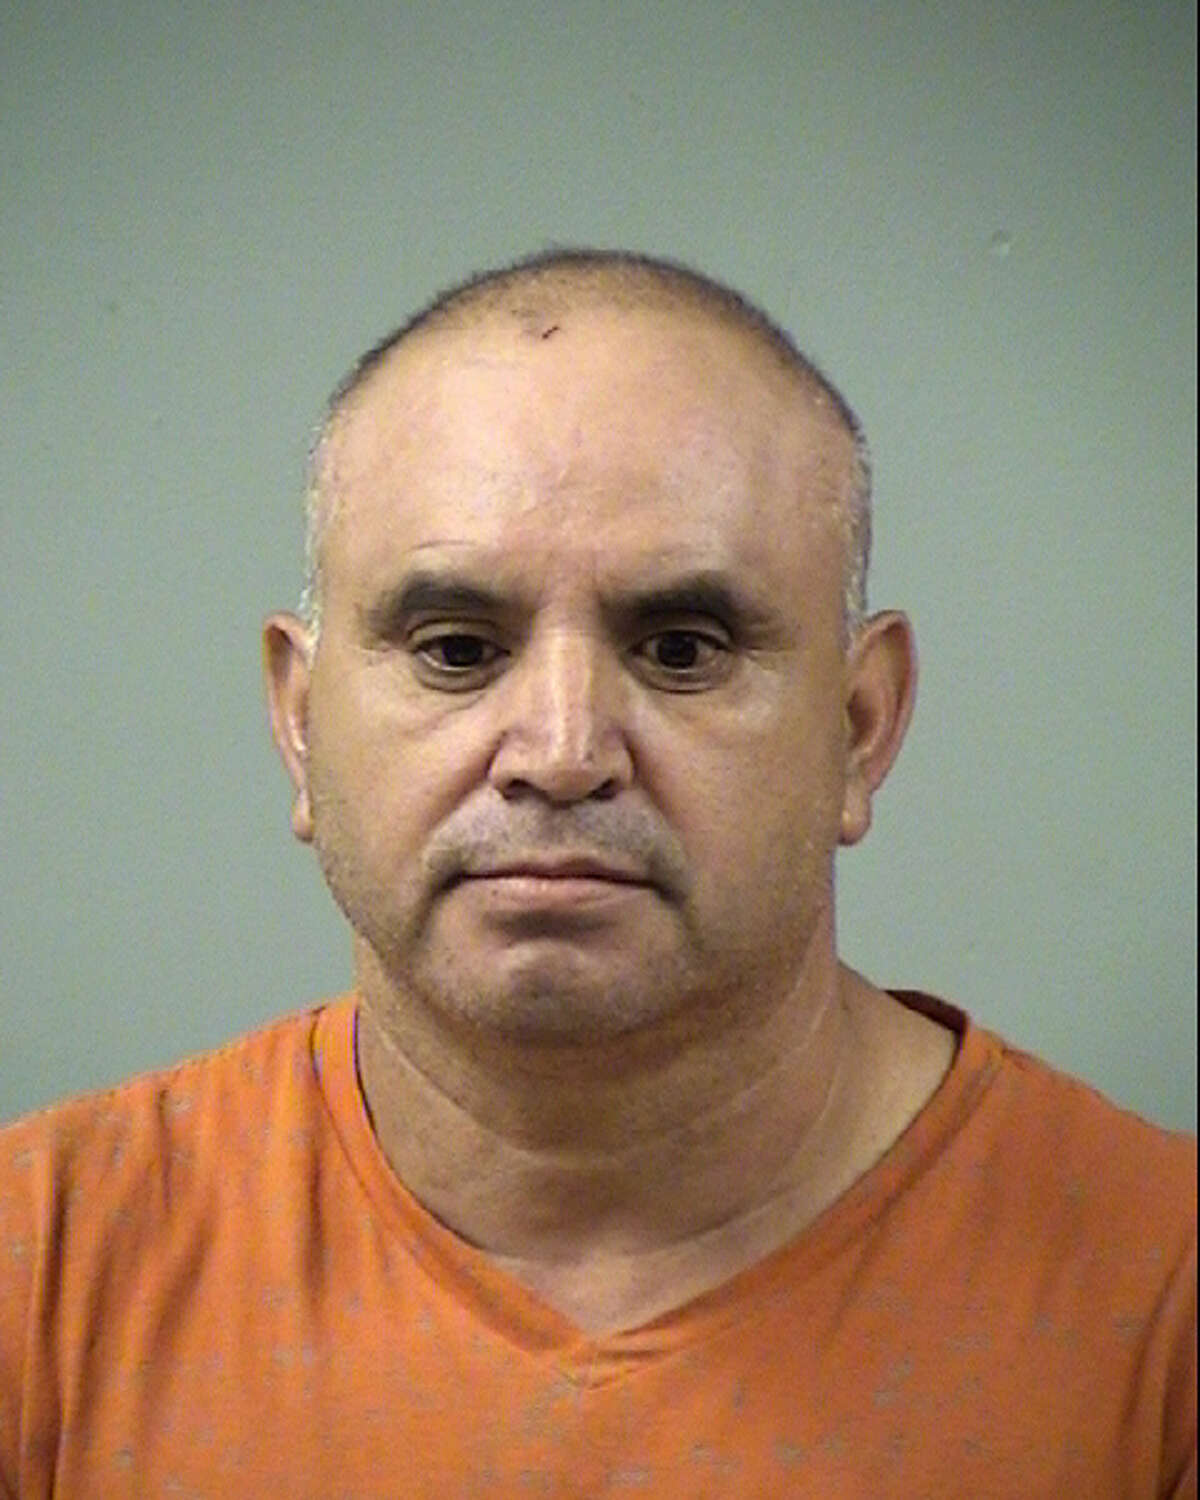 Alvaro Flores-Miramontes, 51, faces a charge of prostitution. He was booked into the Bexar County Jail but has since bonded out.